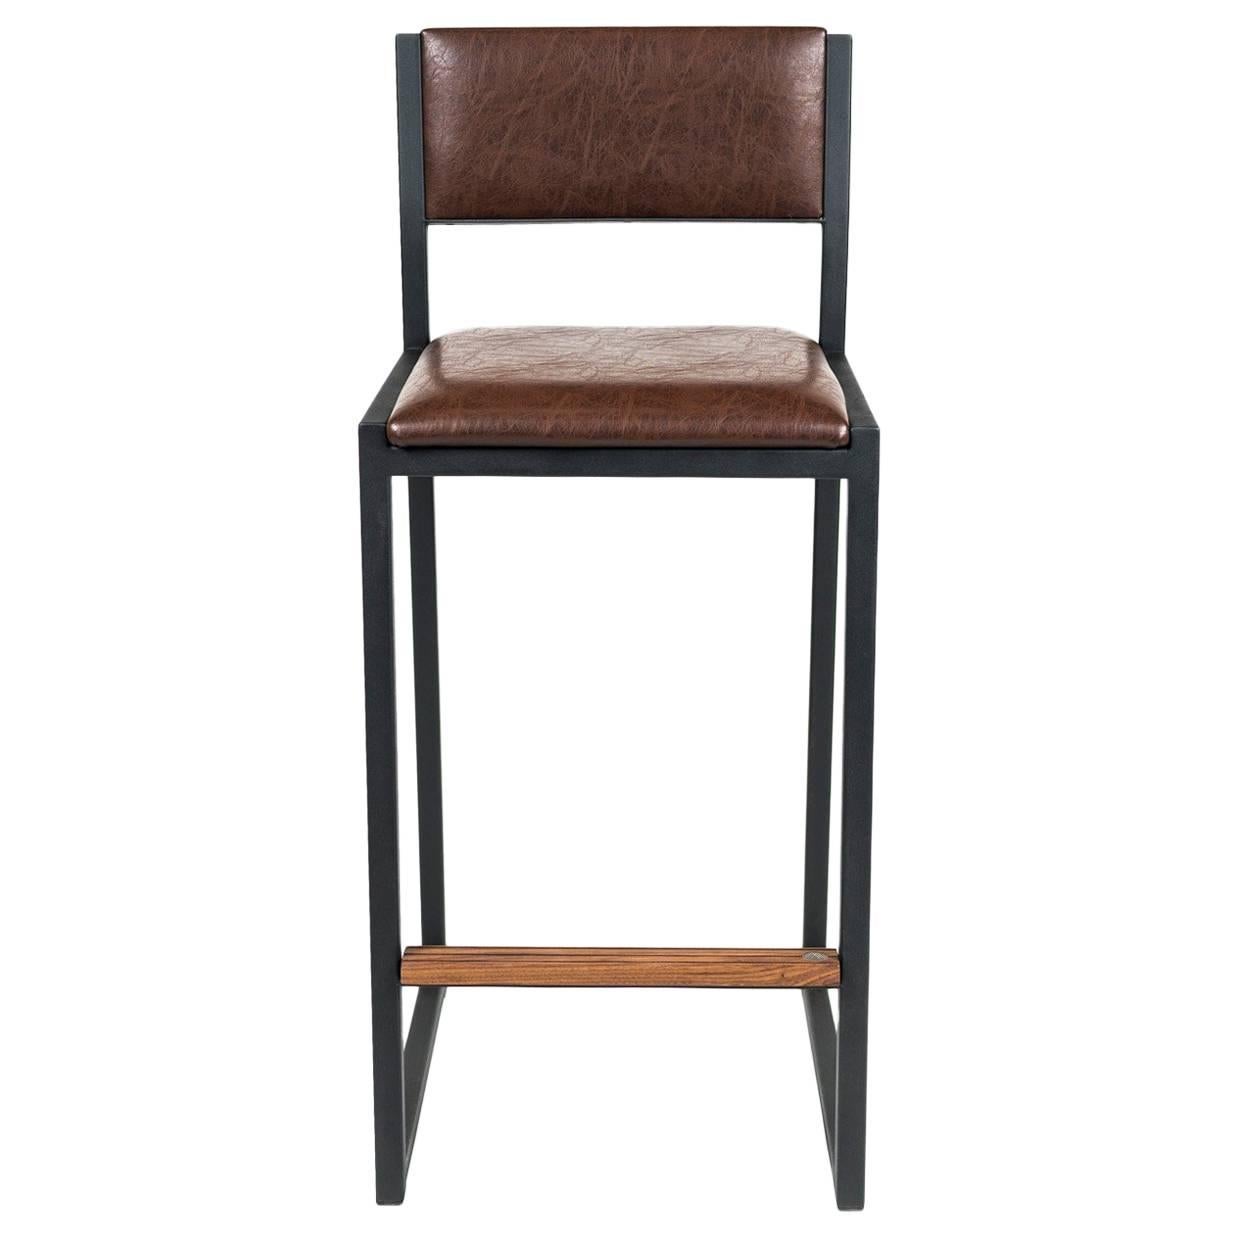 Shaker Counterstool Chair by Ambrozia, Walnut, Black Steel, Aged Brown Vinyl For Sale